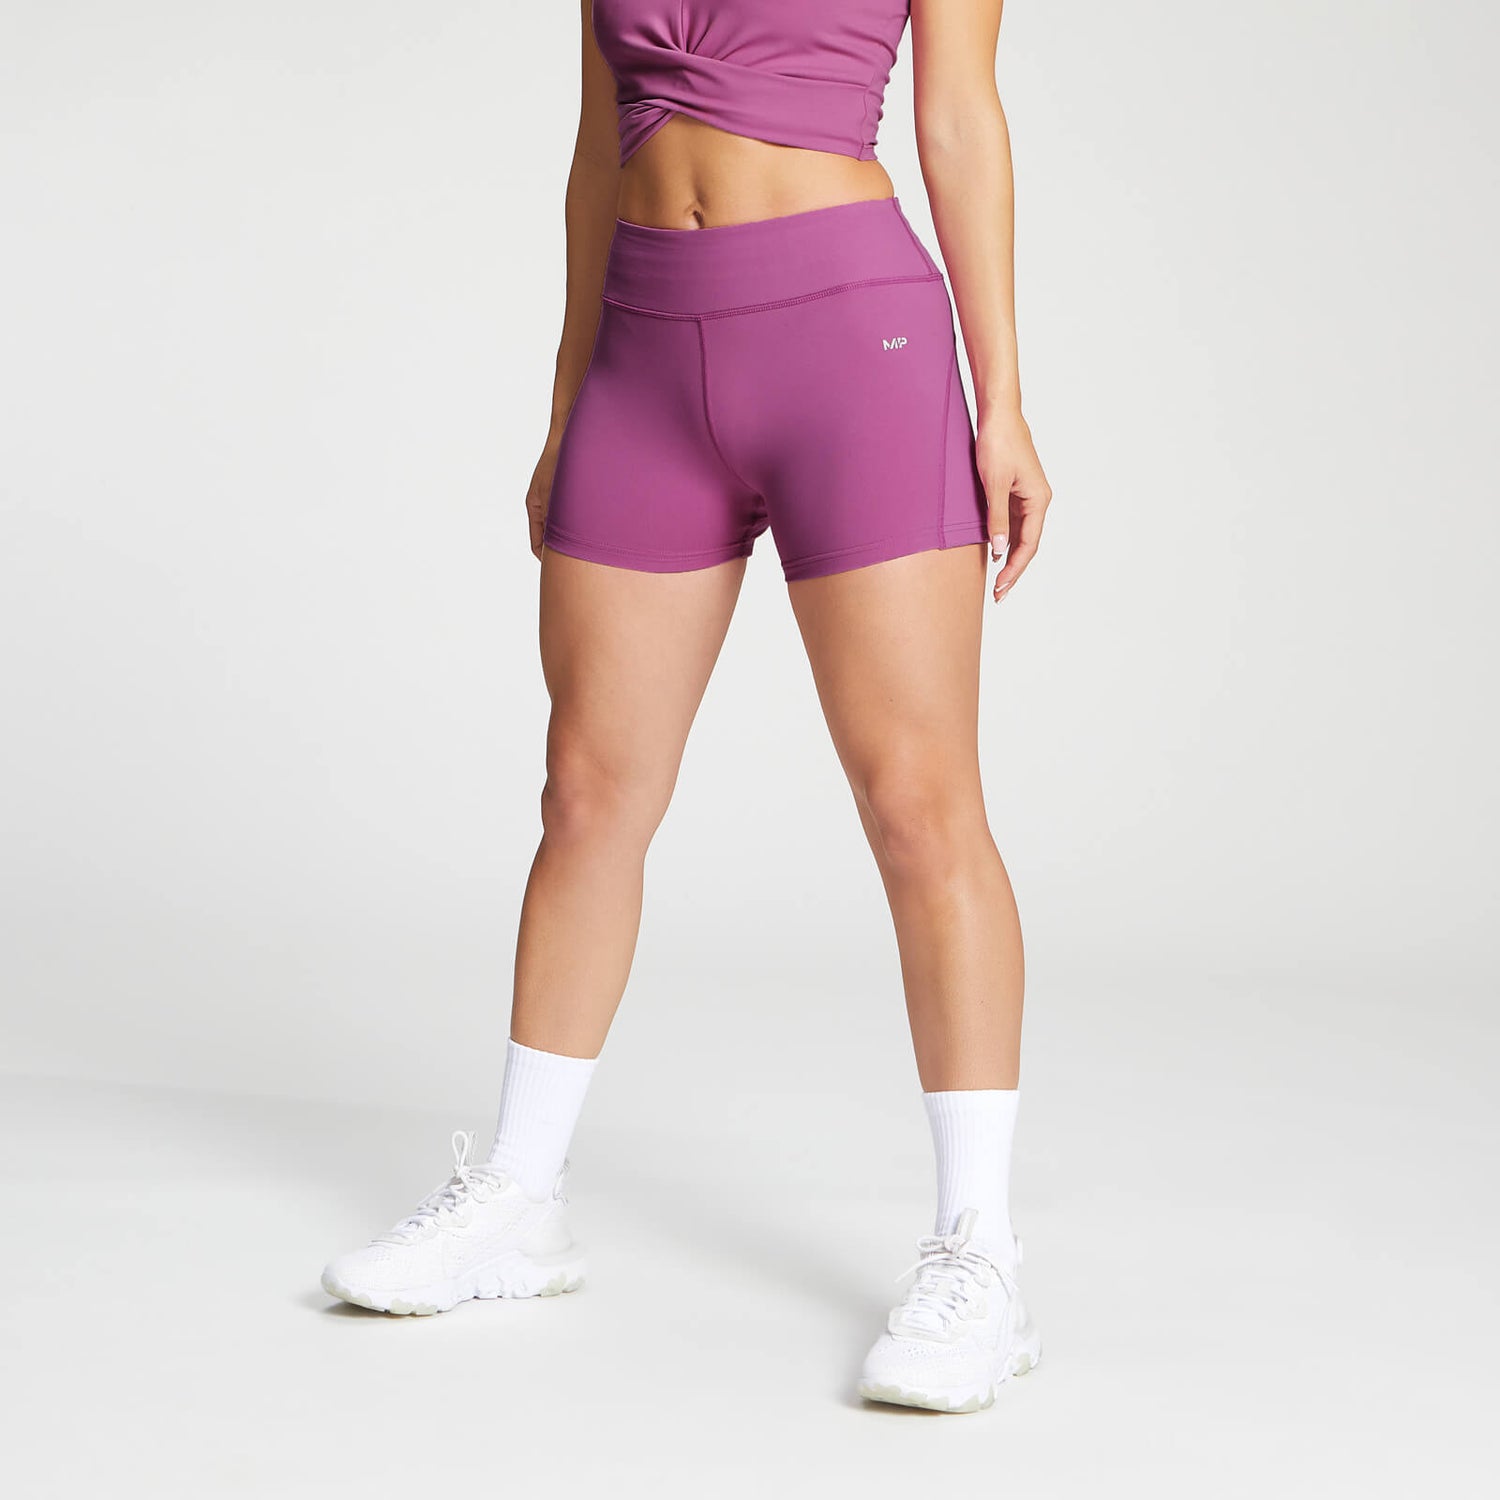 MP Women's Power Booty Shorts - Orchid - L